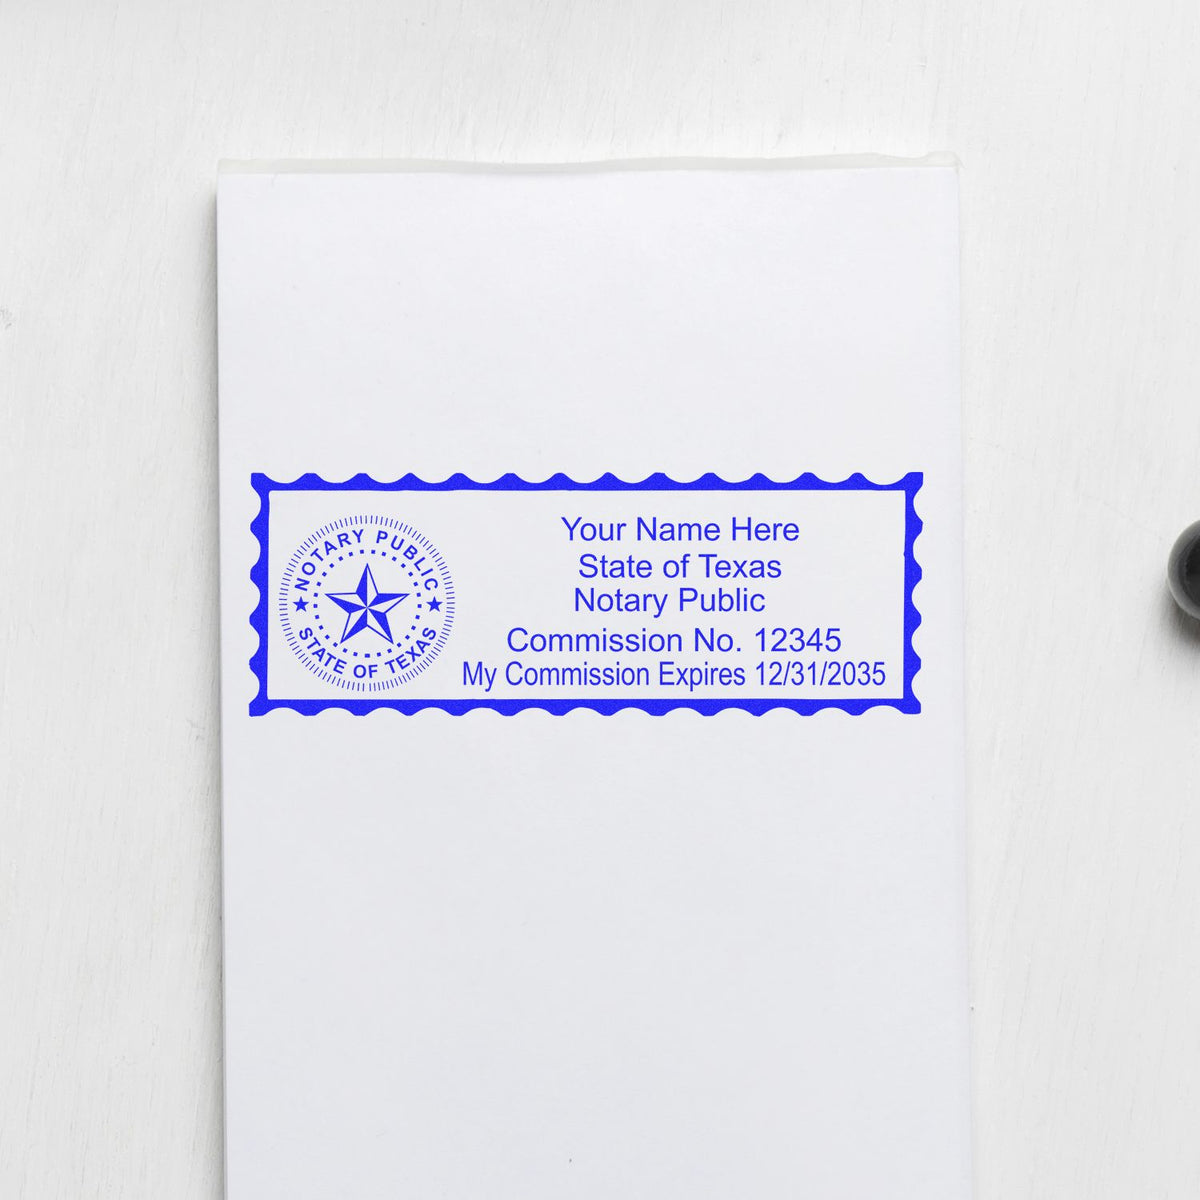 The PSI Texas Notary Stamp stamp impression comes to life with a crisp, detailed photo on paper - showcasing true professional quality.